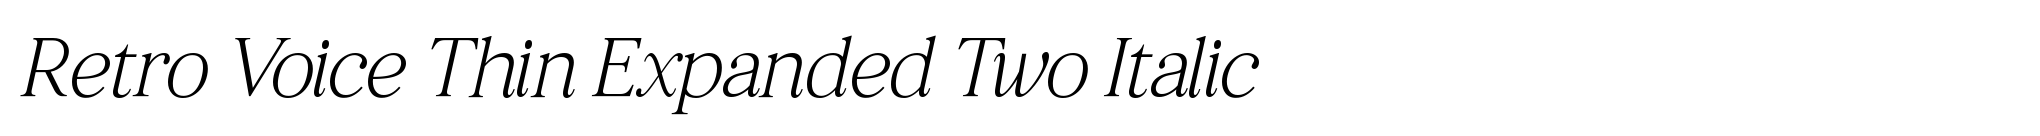 Retro Voice Thin Expanded Two Italic image